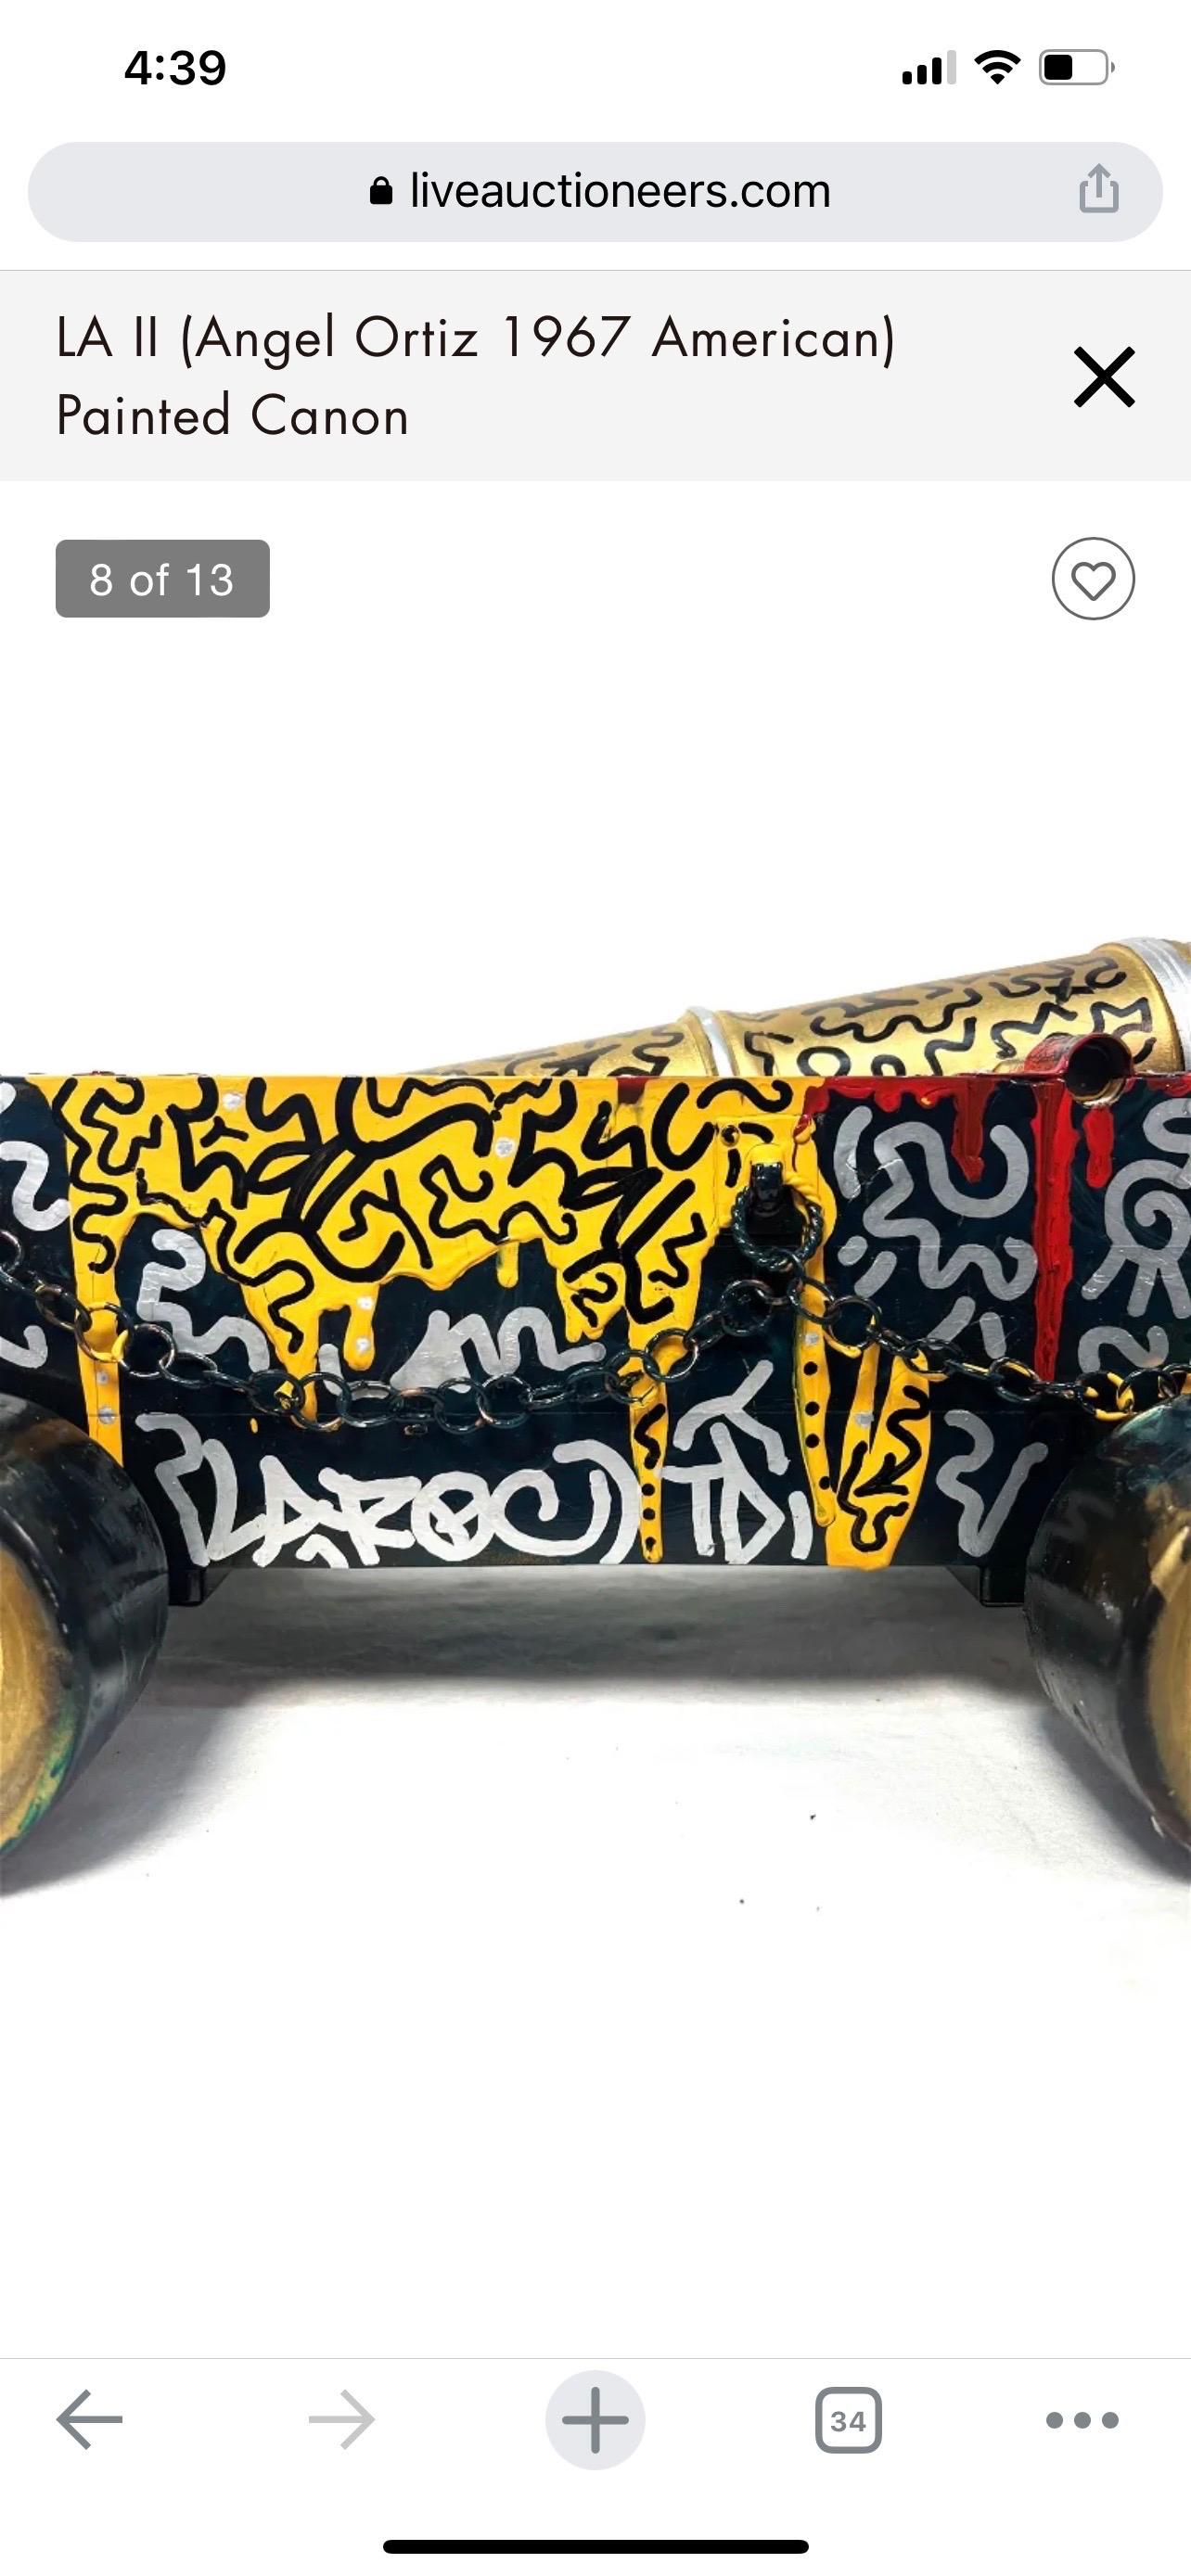 Graffiti Painted Cannon 
Mixed media, wood and hard plastic with metal chain on one side
Circa 1990's
Dimensions: 29